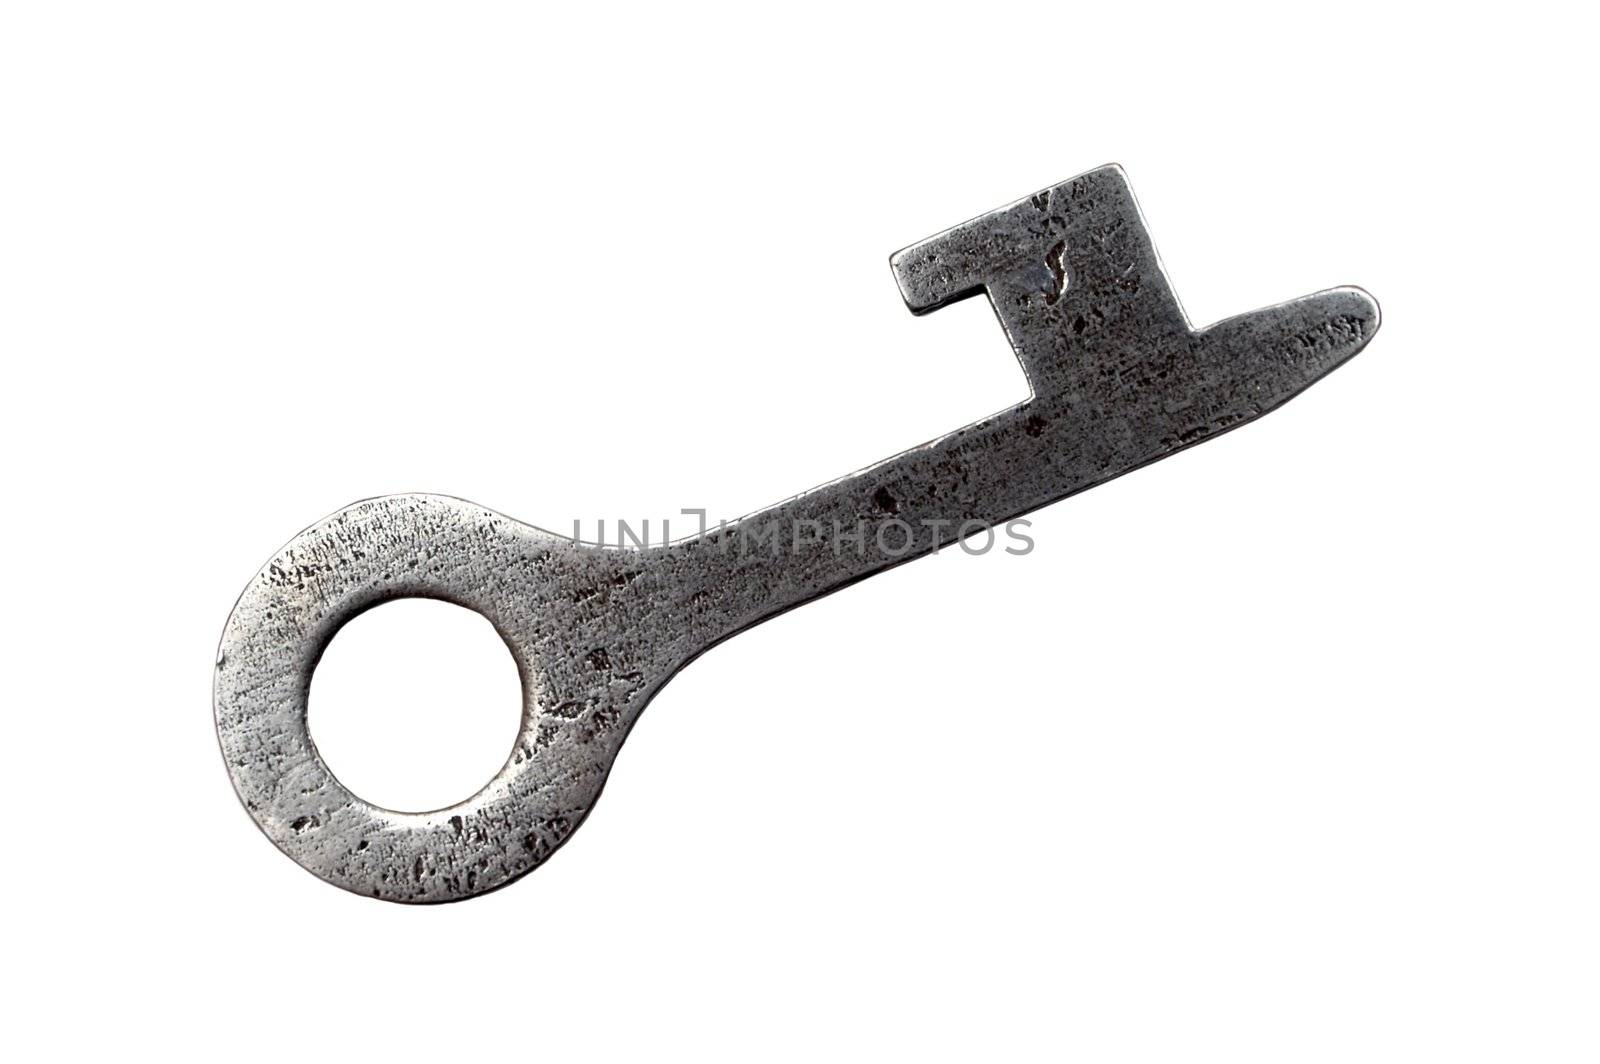 An image of an old metal key